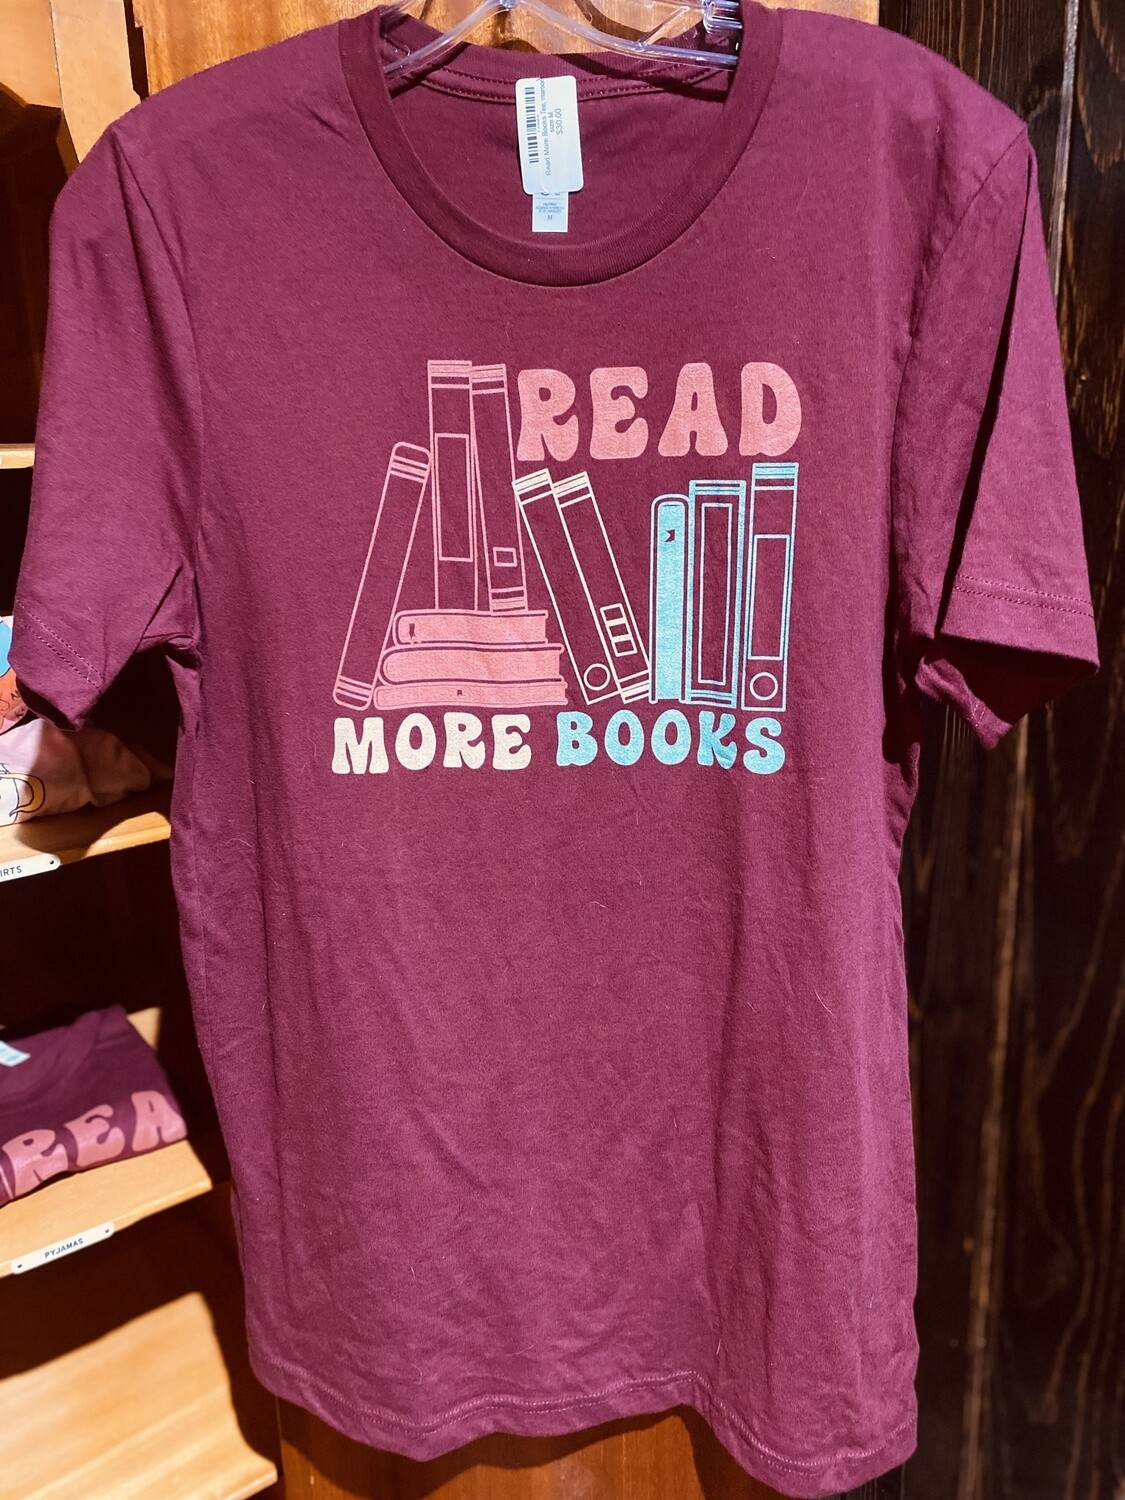 Read More Books Tee, maroon, size L